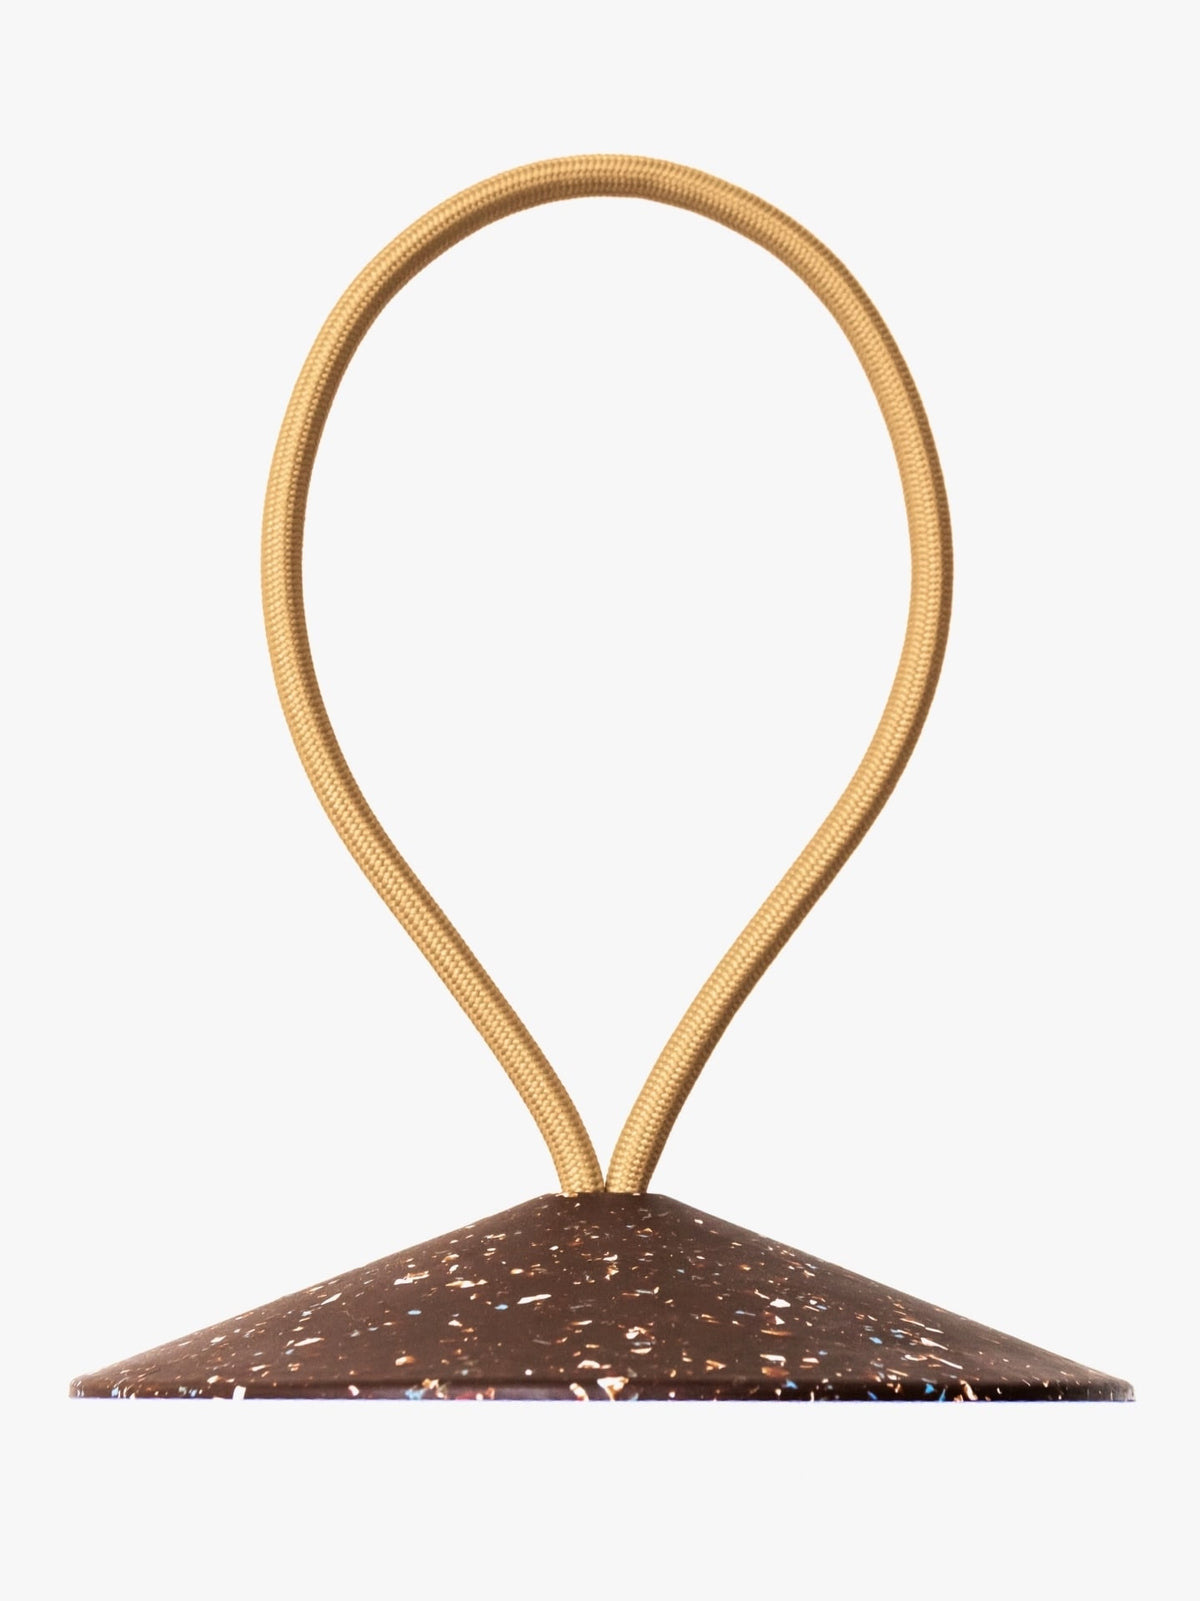 A brown and gold STOP – Doorstop on a white background.